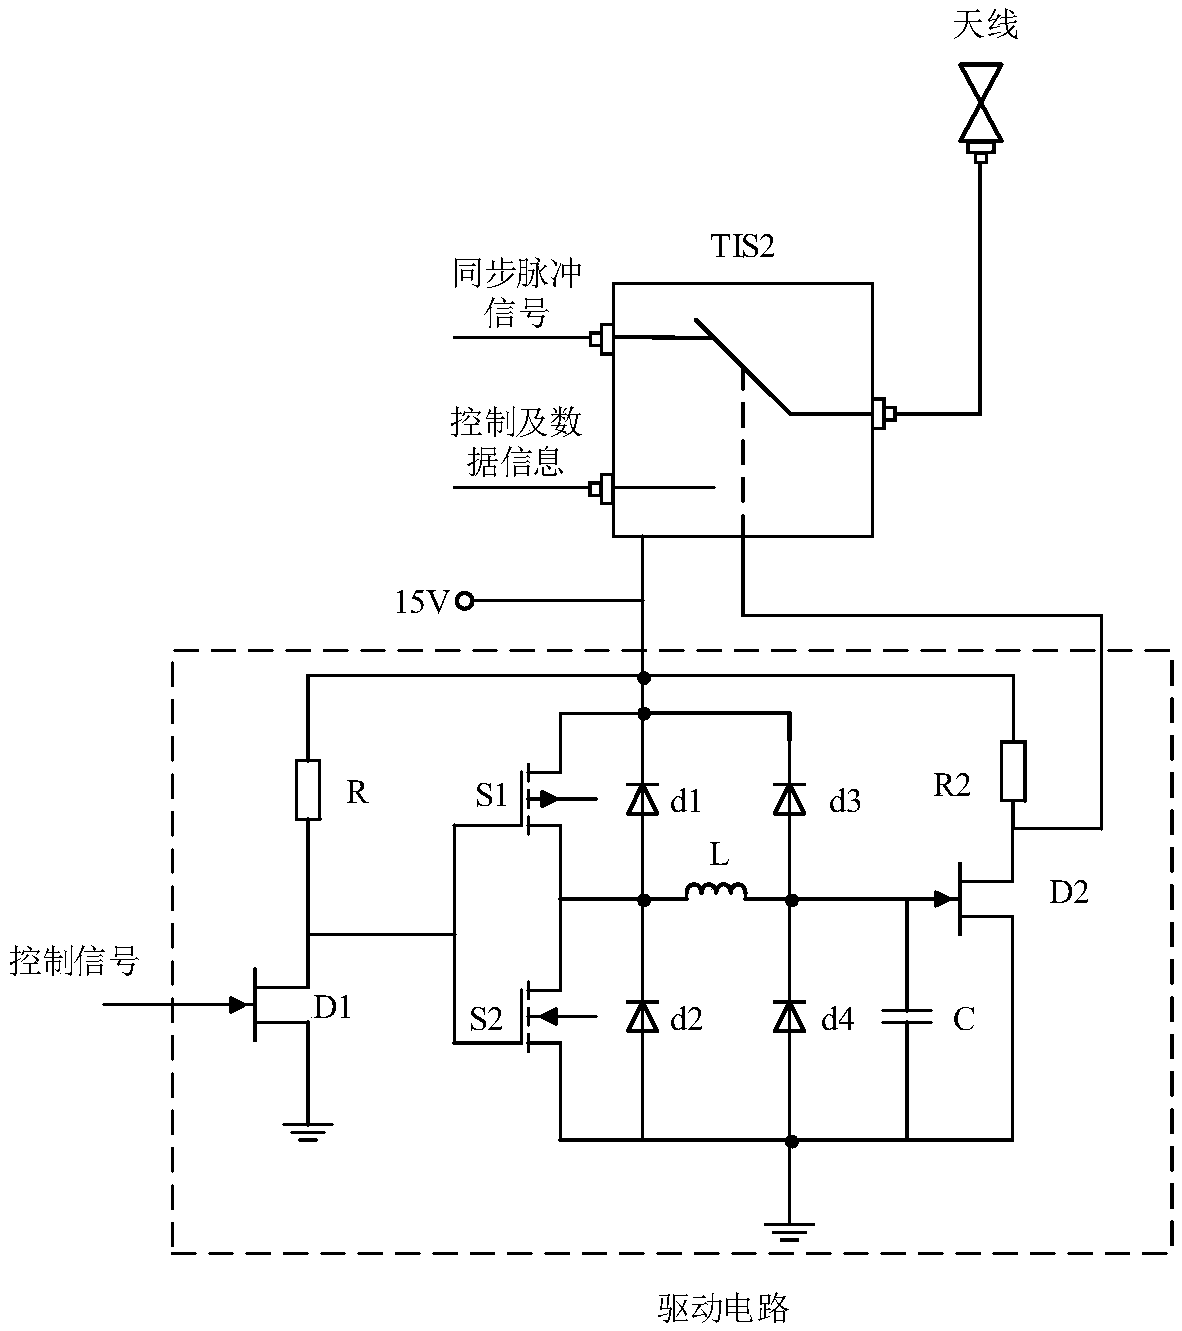 Synchronizing device for switch cabinet local discharge multi-joint monitoring system